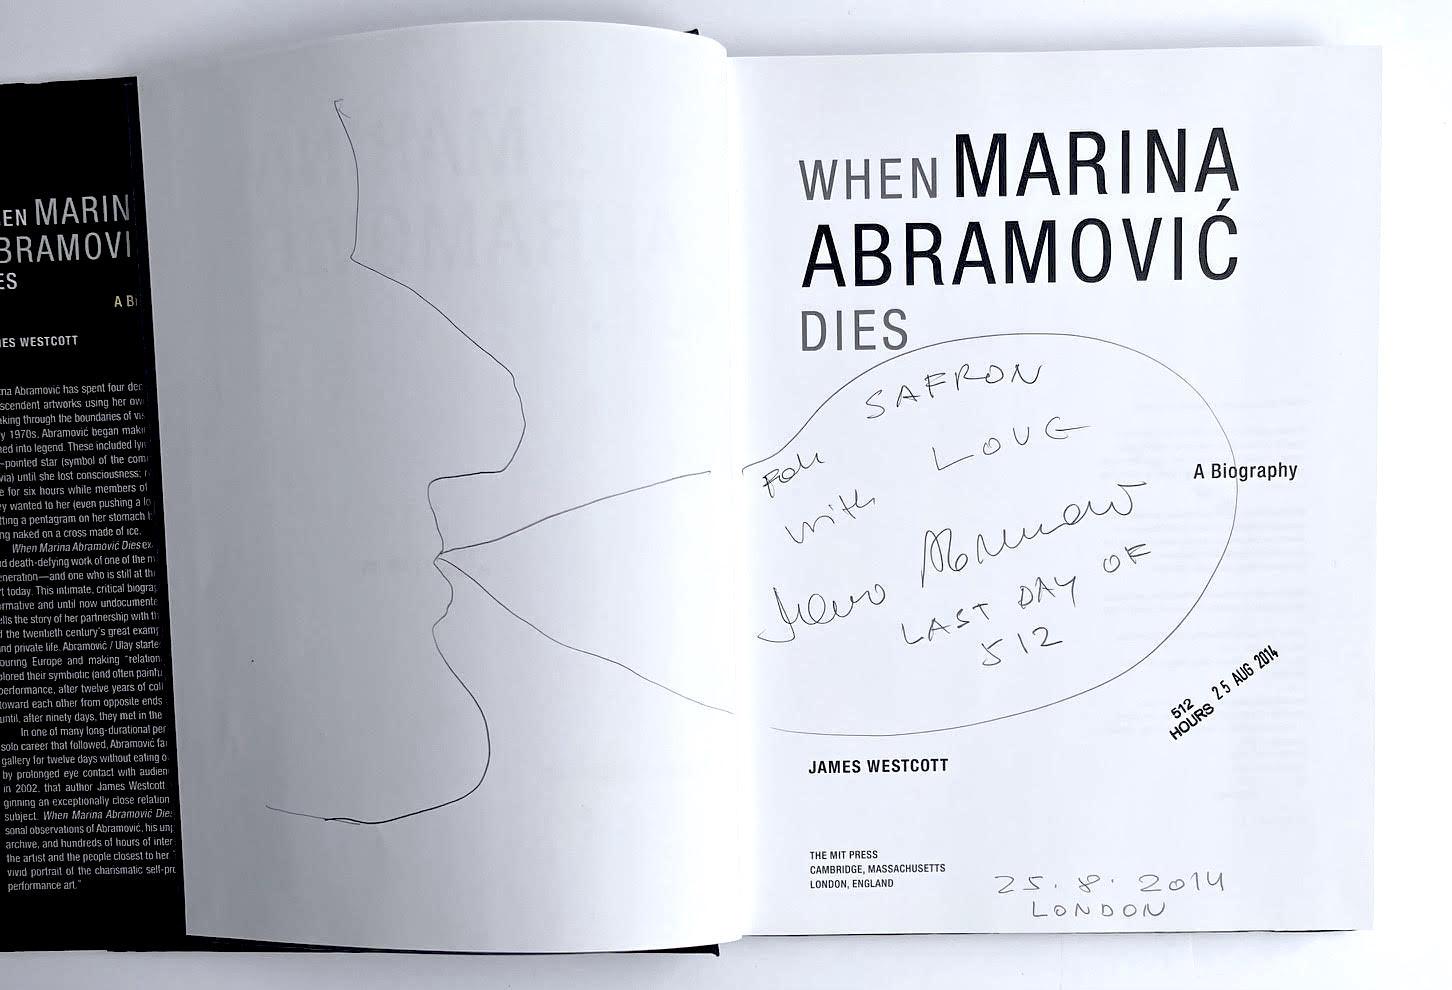 Marina Abramovic
Original self-portrait drawing (hand signed and inscribed), 2014
 Ink drawing held inside hardback monograph, done at the artist's Serpentine Gallery exhibition, hand signed and warmly inscribed
Ink drawing is hand signed, dated and